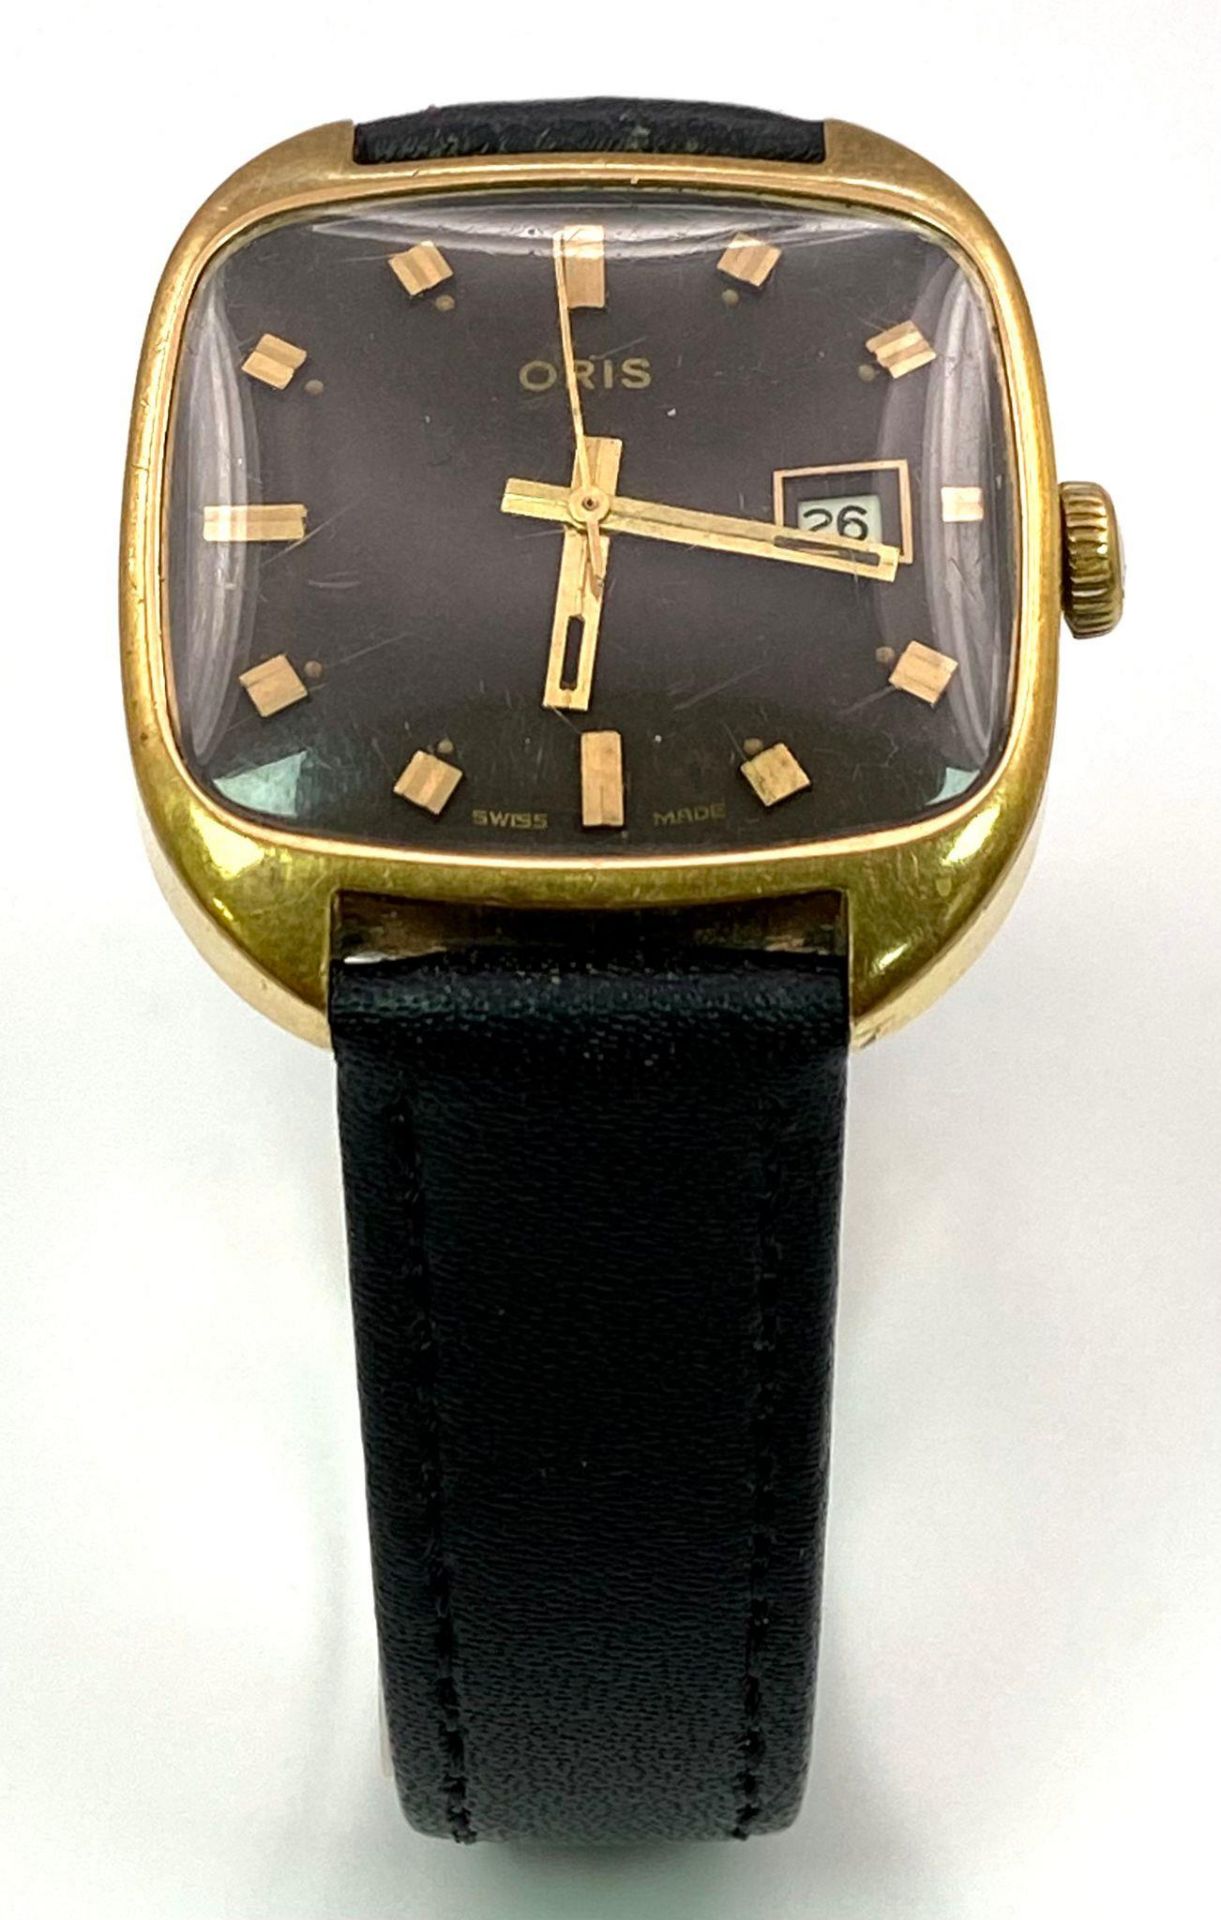 A Vintage 1950s Oris Gents Mechanical Watch. Black leather strap. Gold plated square case - 31mm. - Image 4 of 11